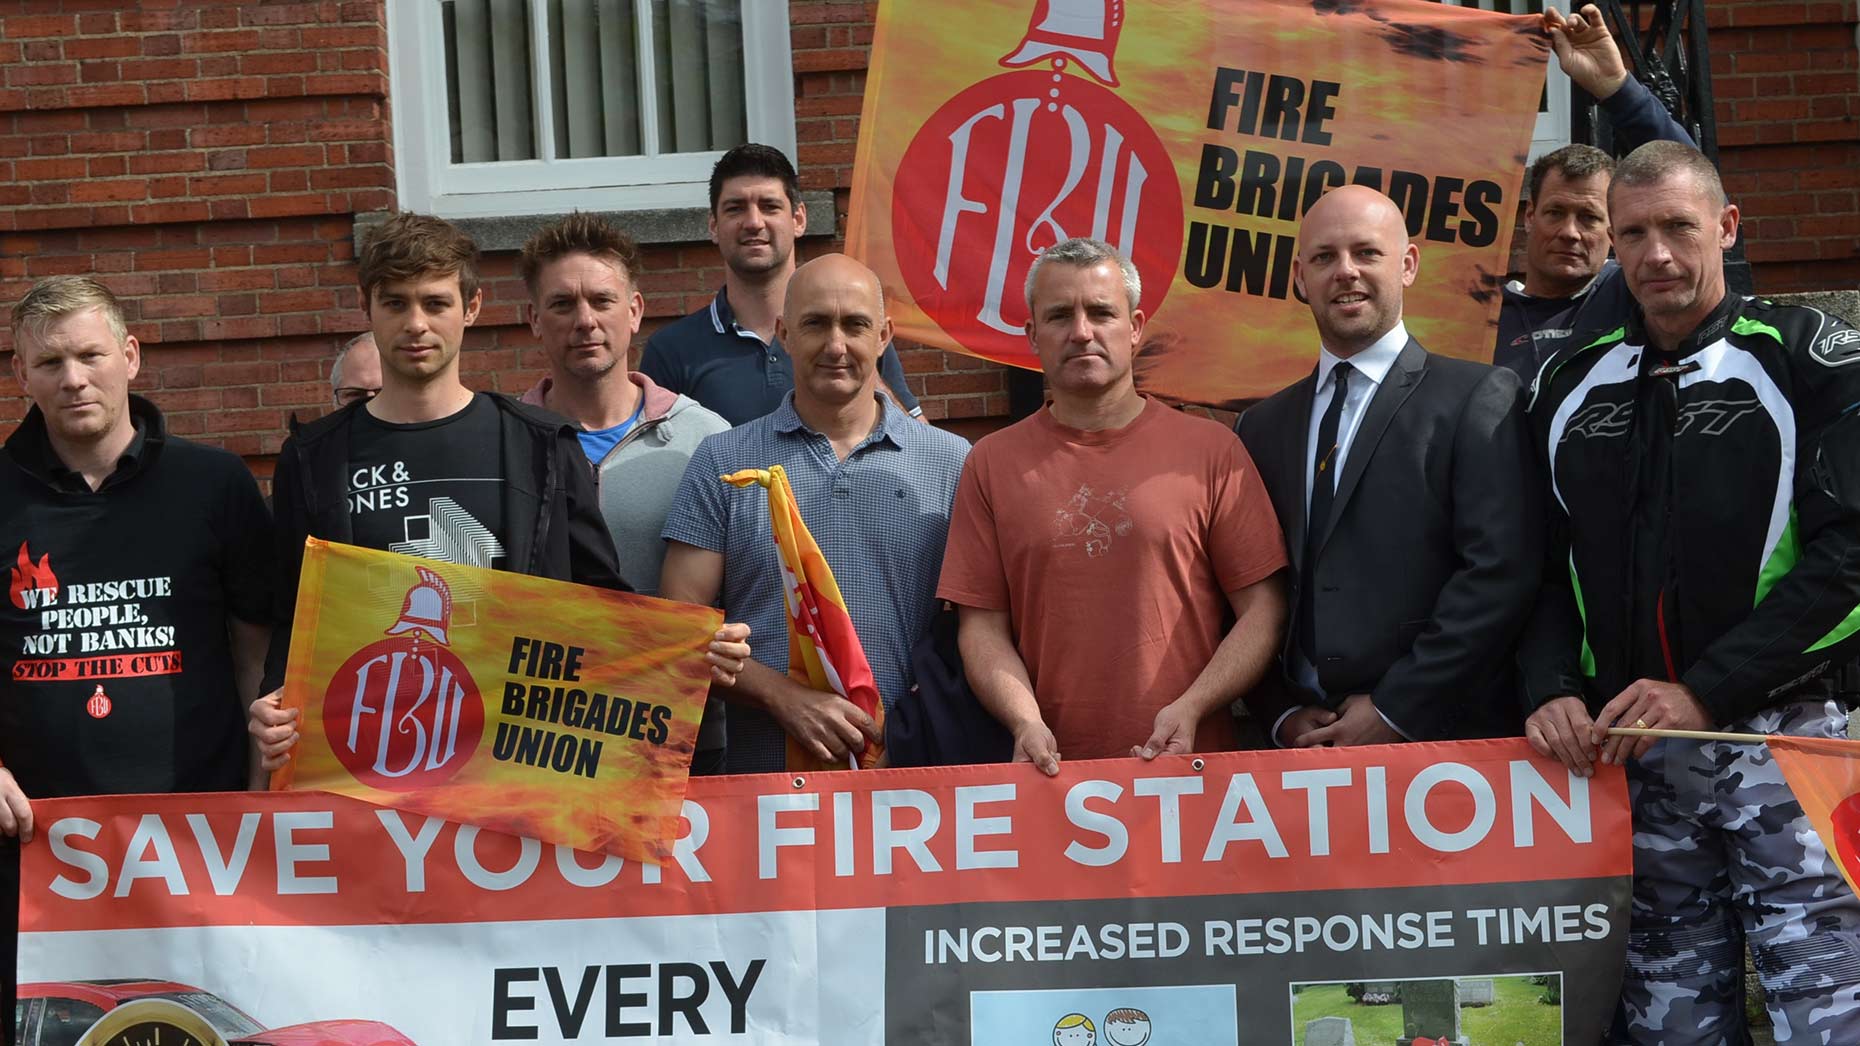 A protest against proposed changes to Lincolnshire Fire and Rescue outside County Hall. Photo: Stefan Pidluznyj for The Lincolnite